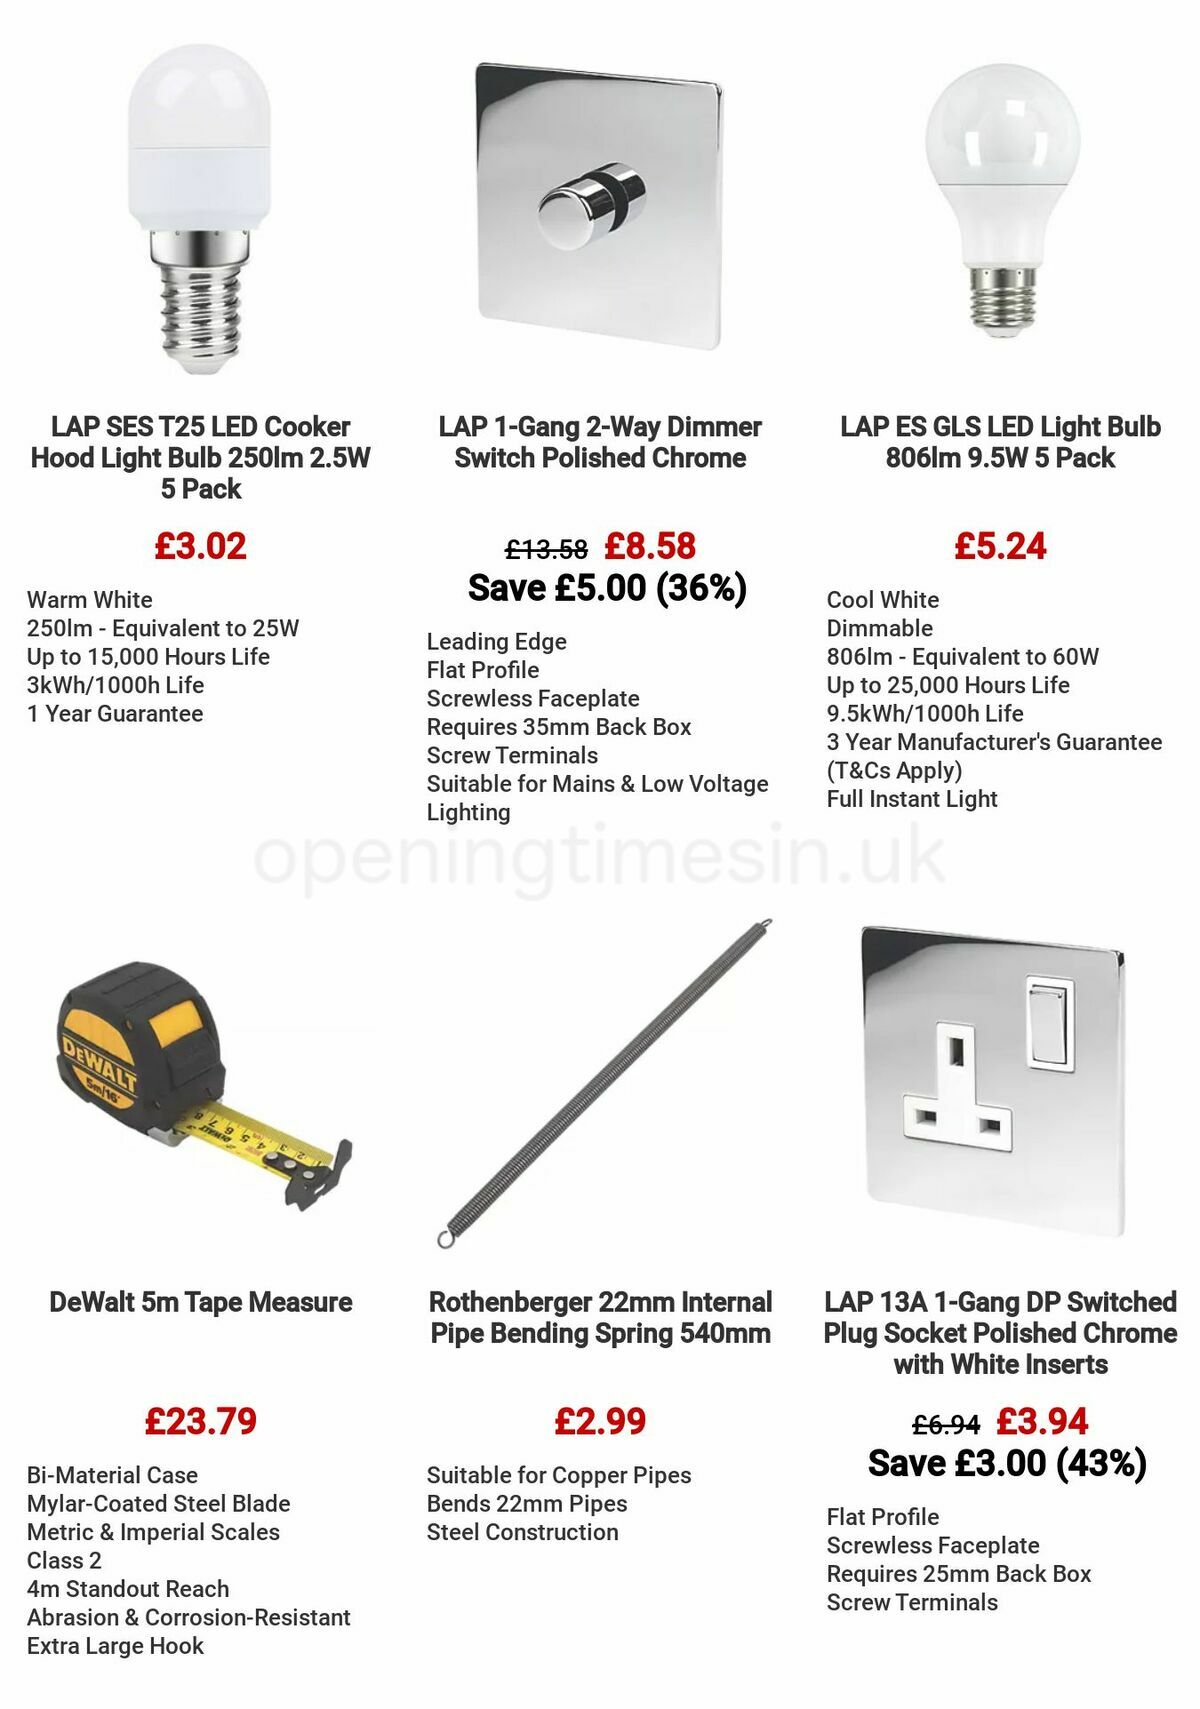 Screwfix Clearance Offers from 29 June